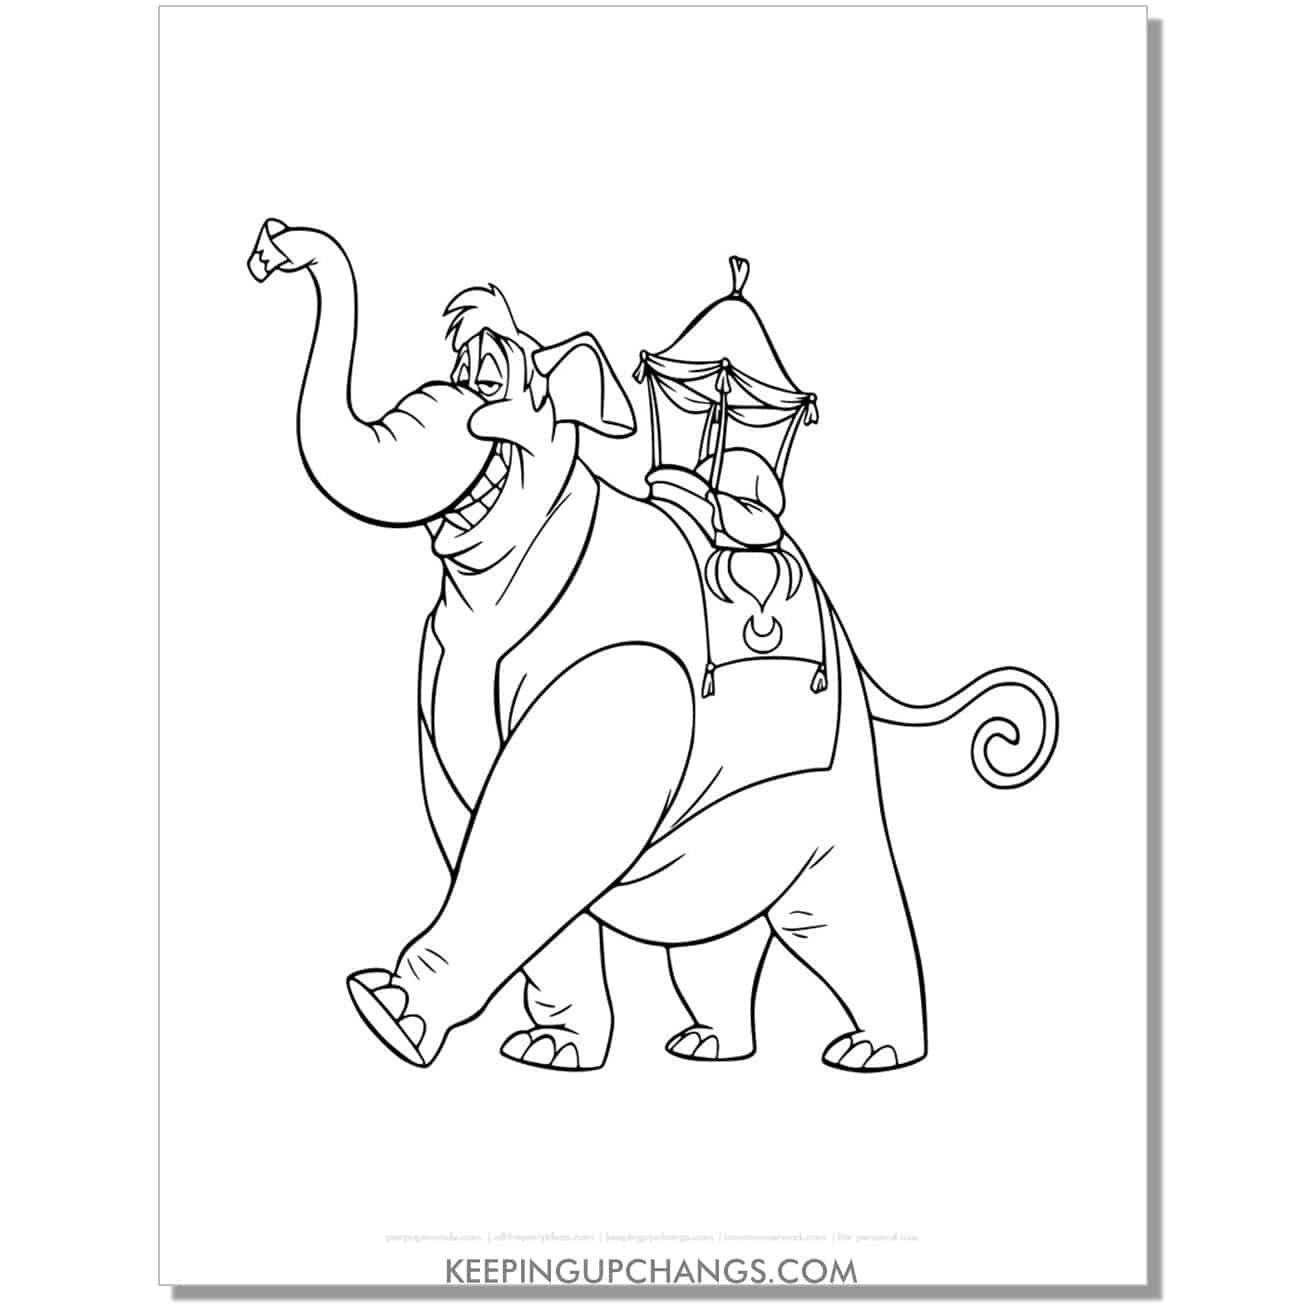 aladdin abu as elephant with seat for aladdin coloring page, sheet.